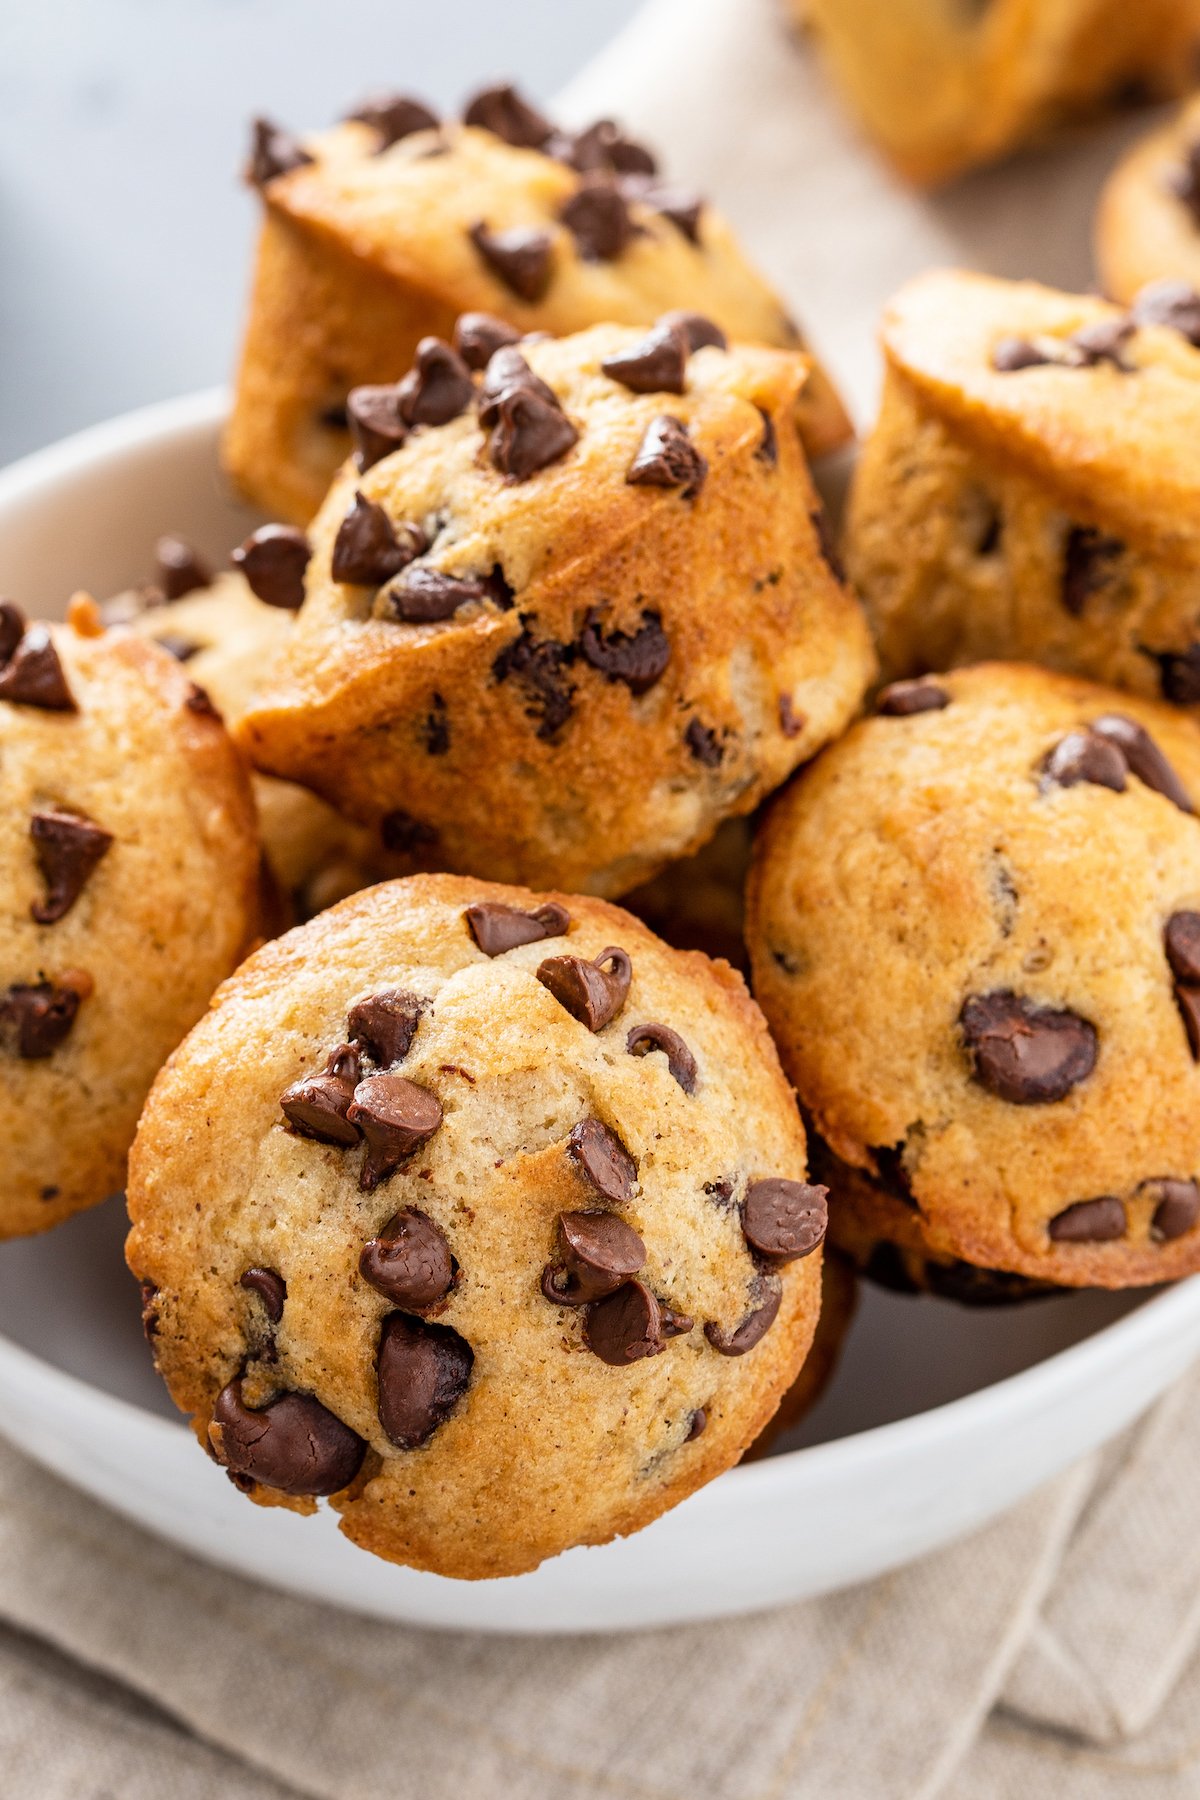 Mini muffins with chocolate chips, piled into a serving bowl.